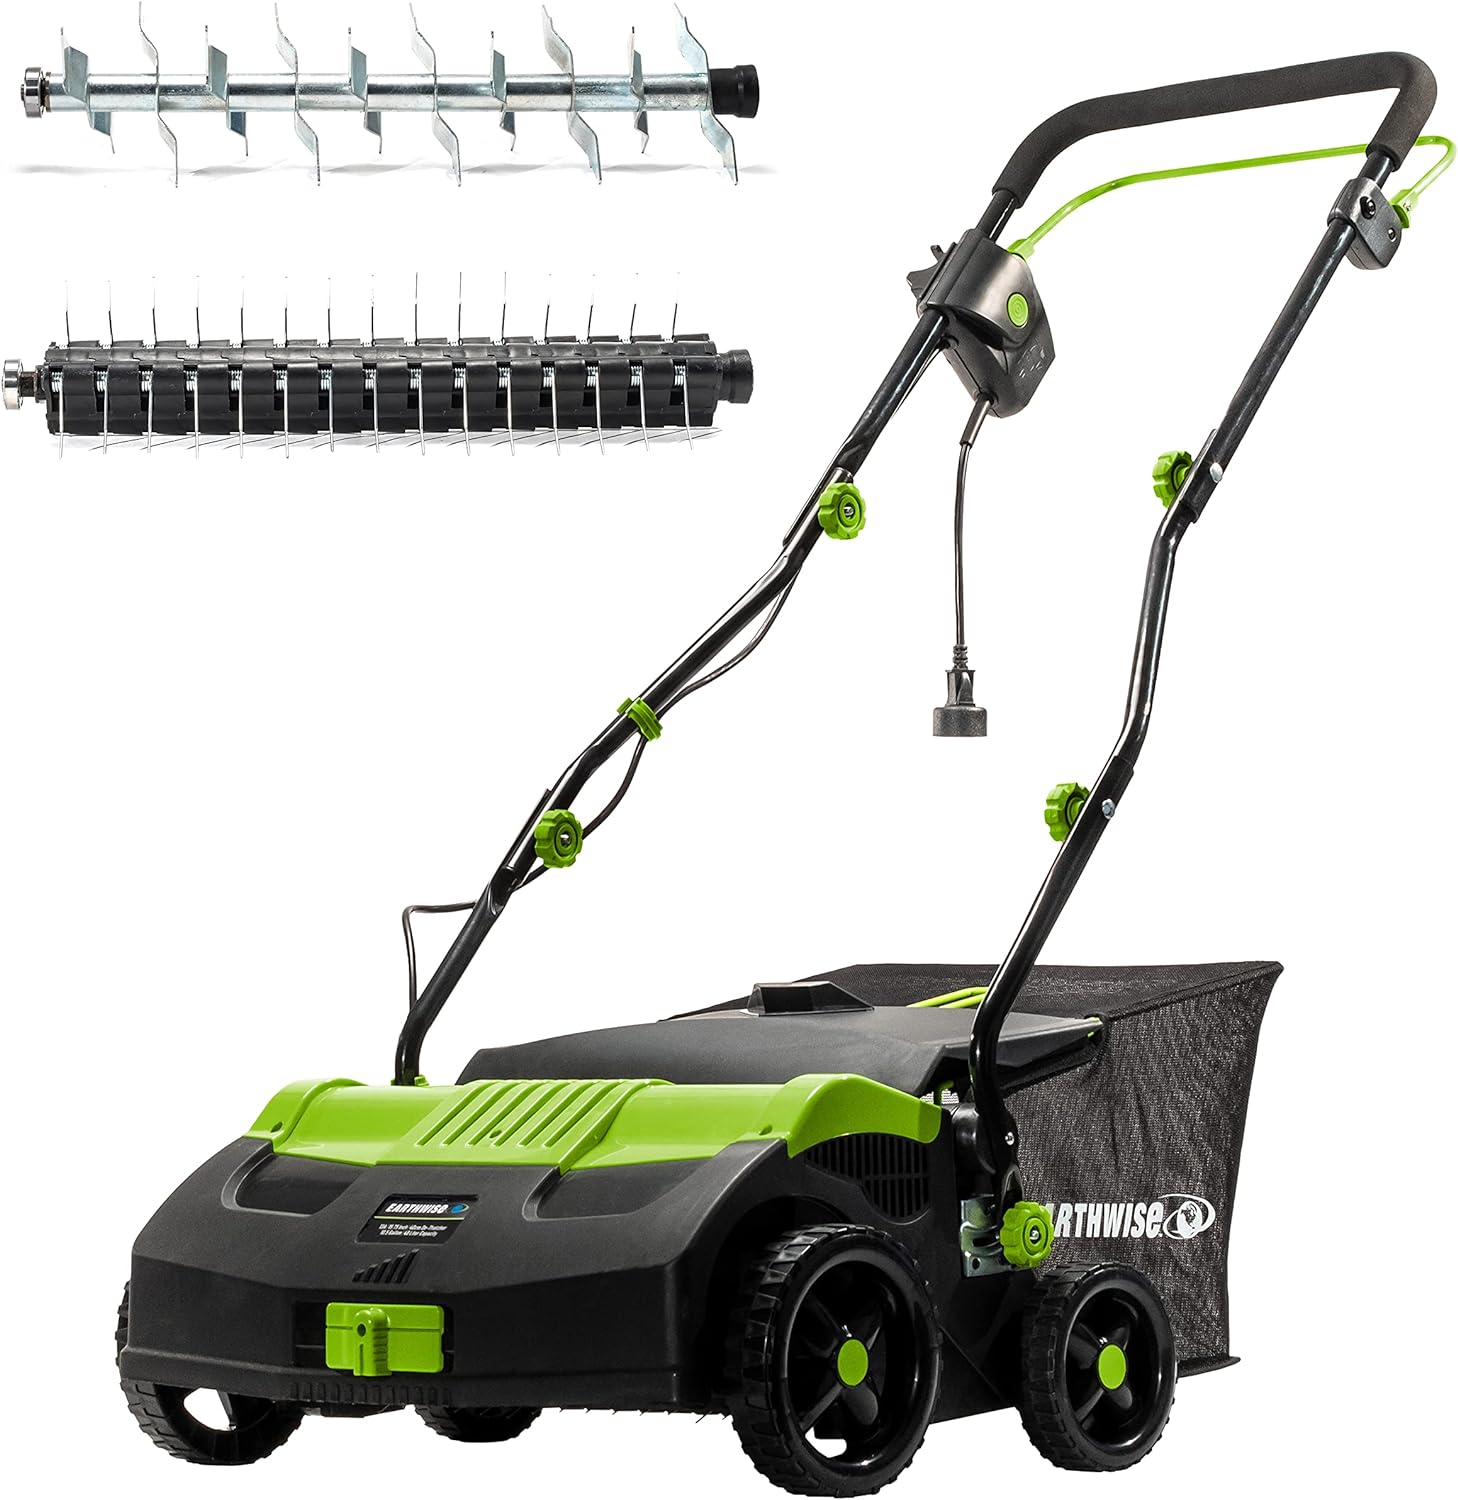 Earthwise Lawn Mower Attachments at